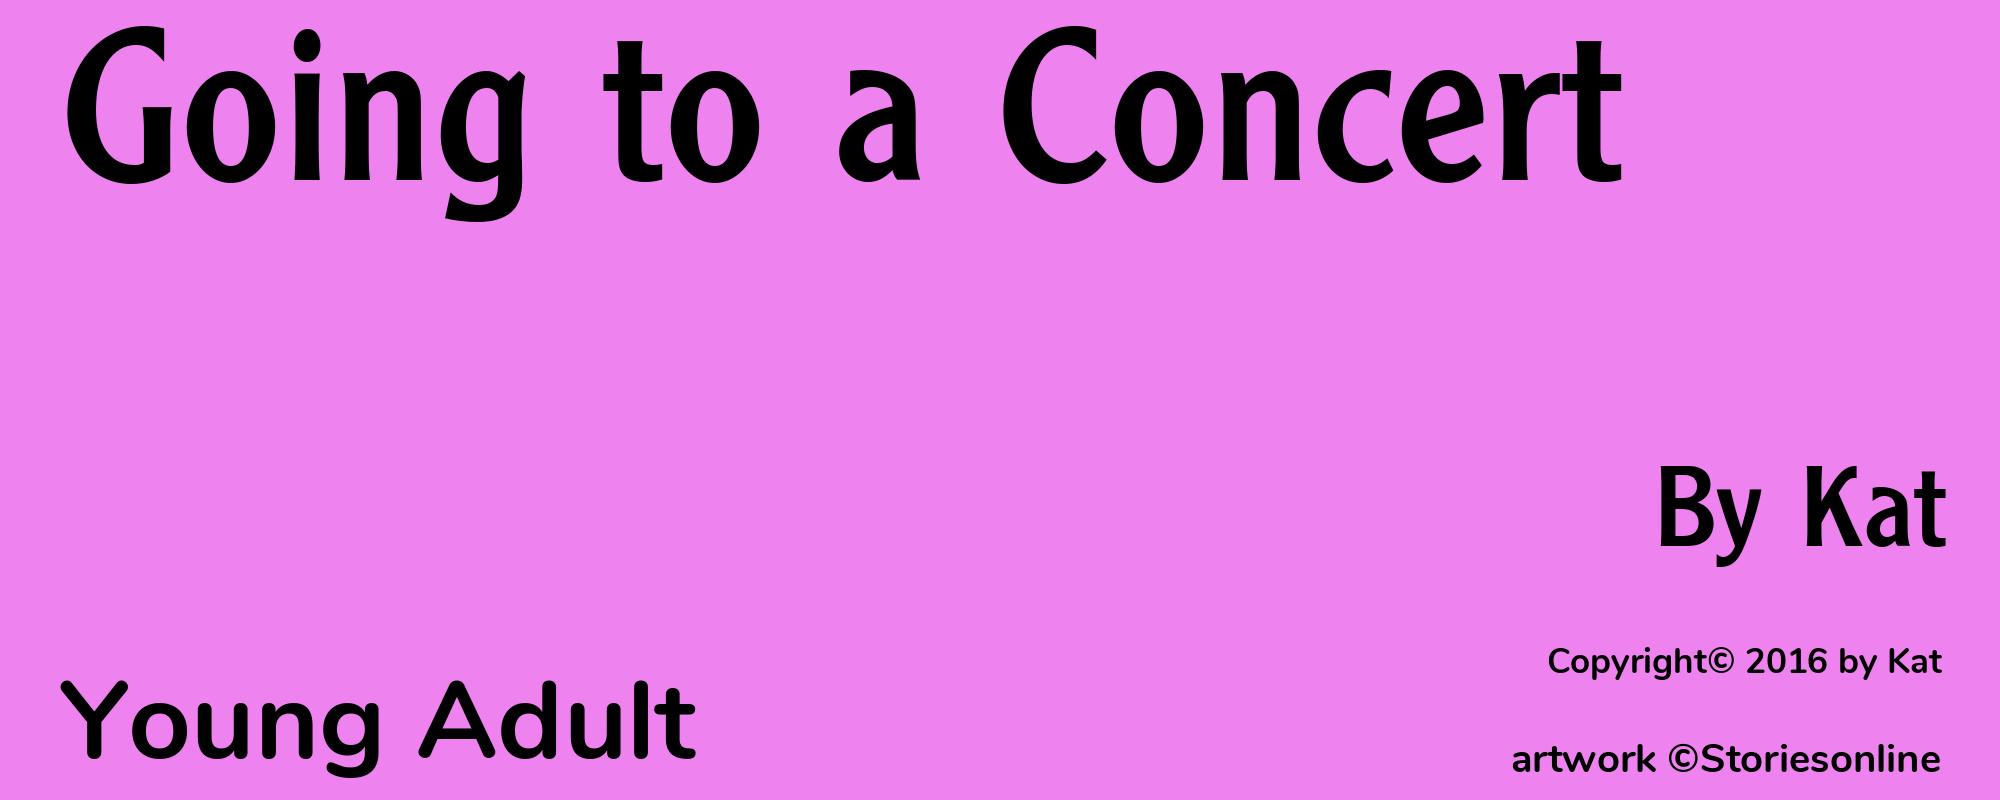 Going to a Concert - Cover